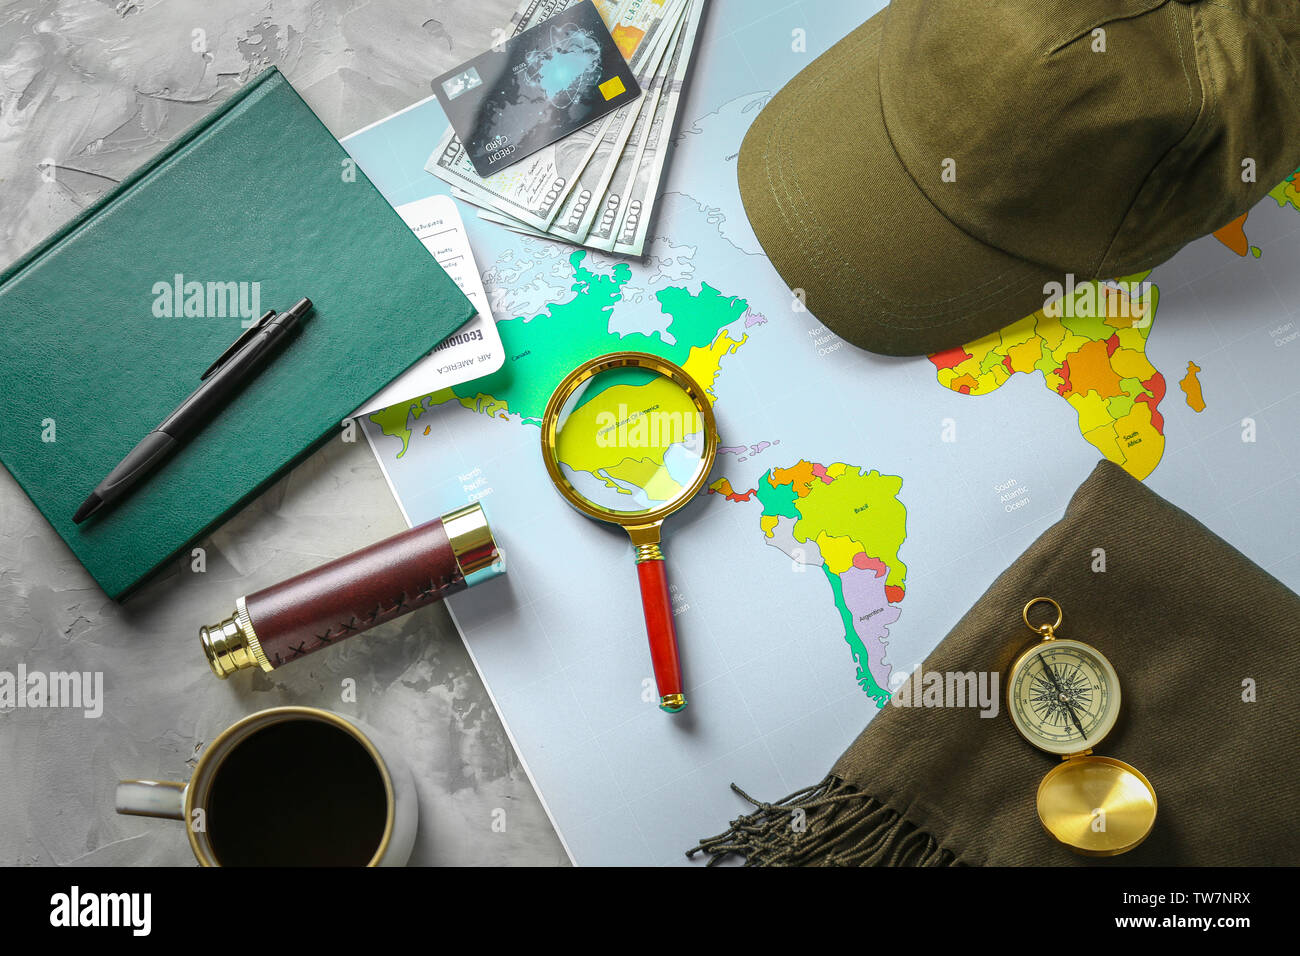 Composition with magnifying glass and world map on table Stock Photo